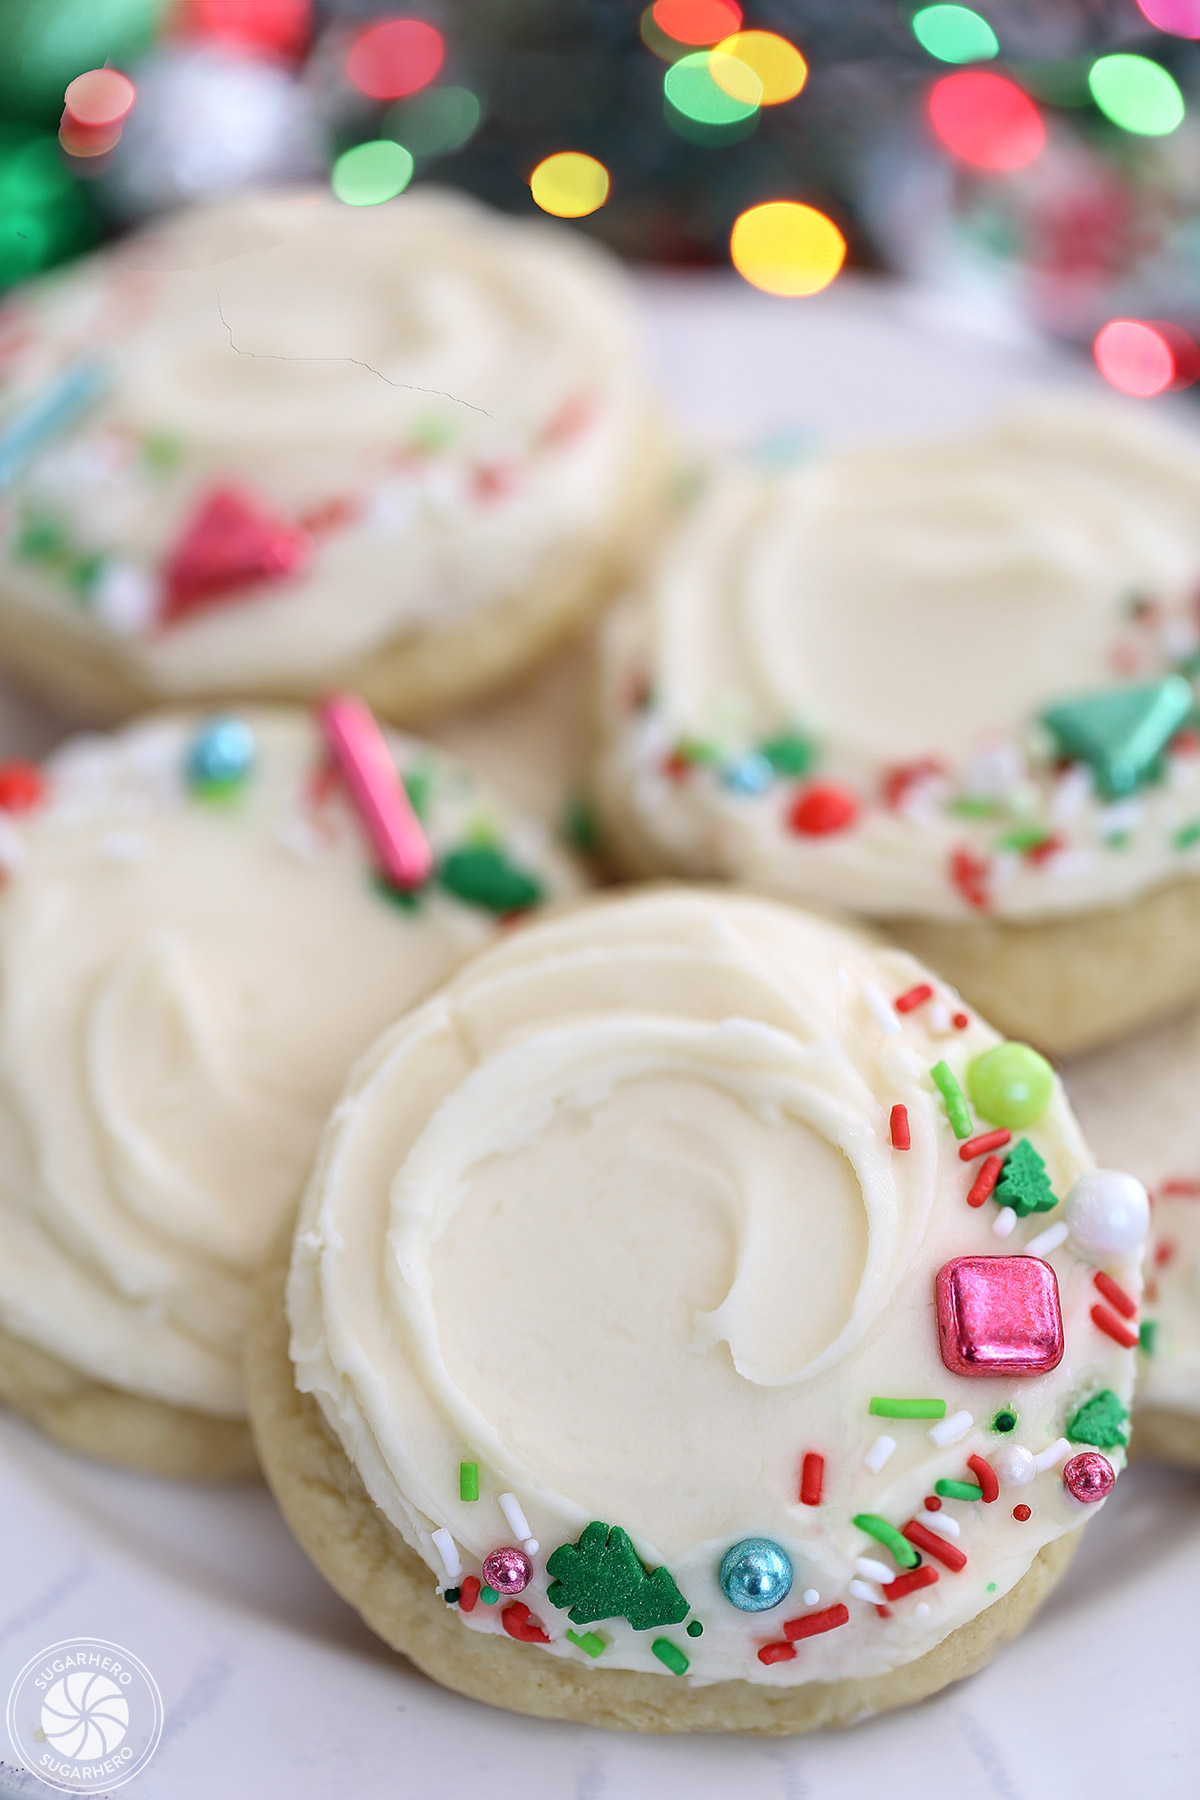 Five big soft sugar cookies on a round white plate with scalloped edges.